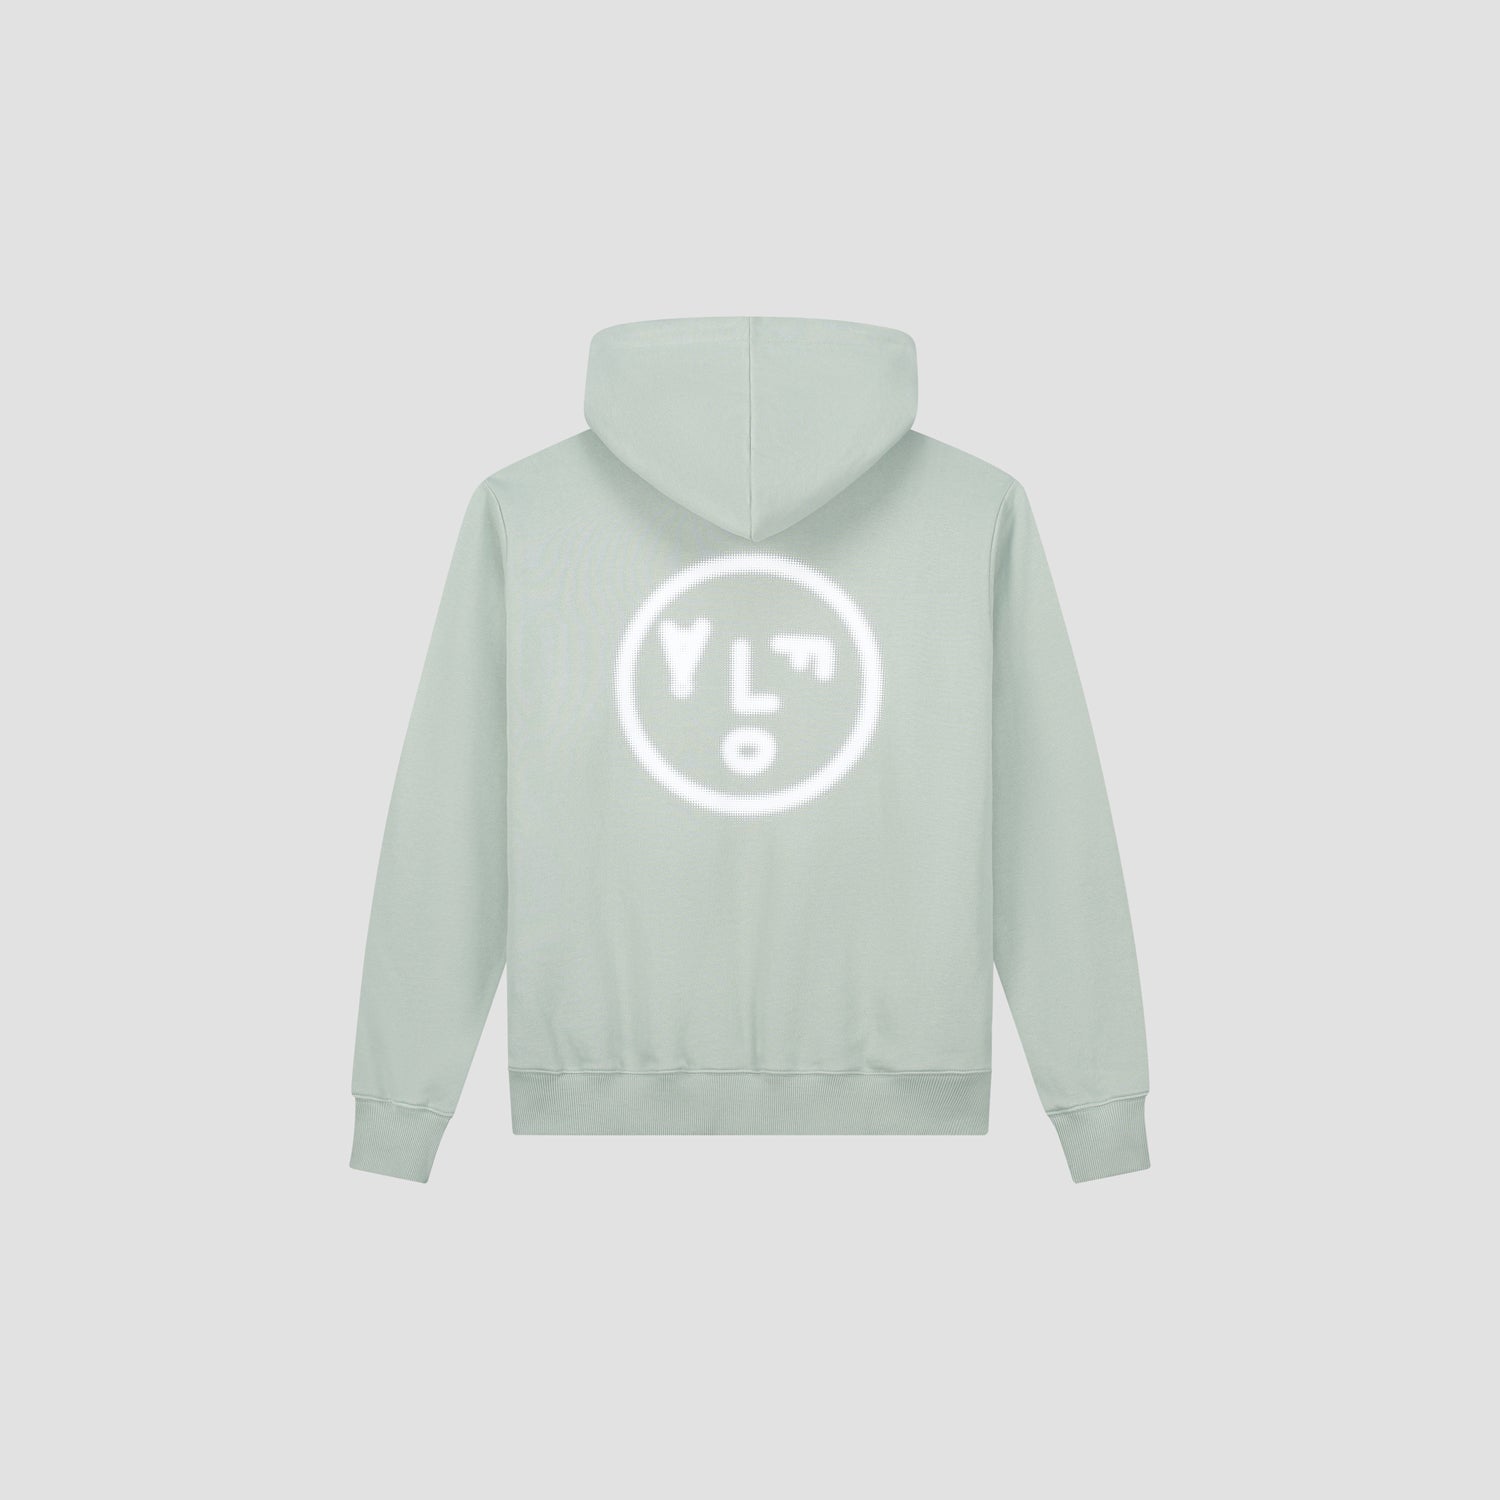 Pixelated Face Hoodie - Pale Green